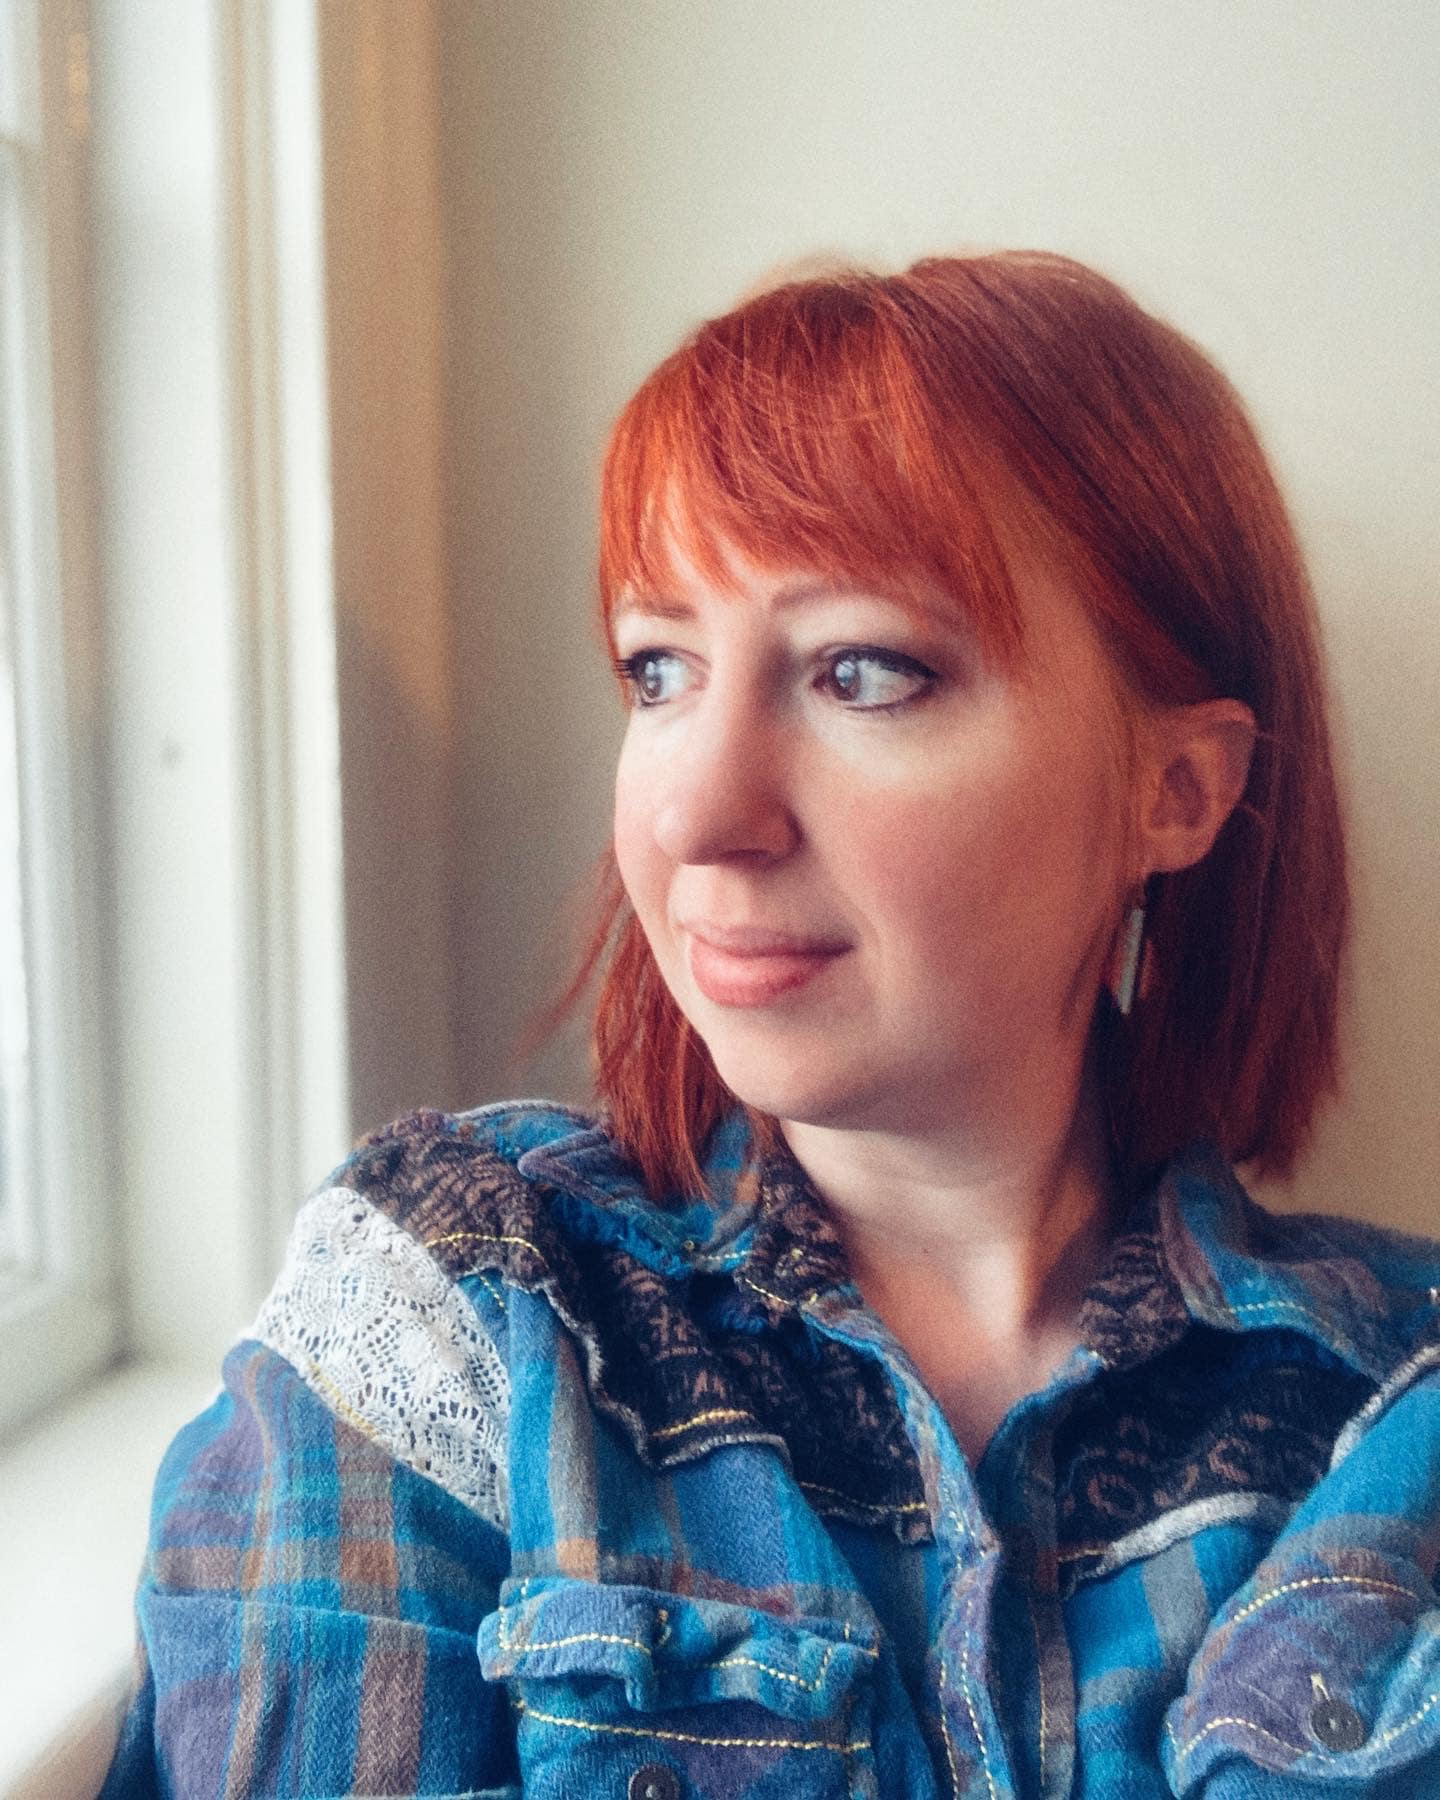 A person with short, red hair and a thoughtful expression.